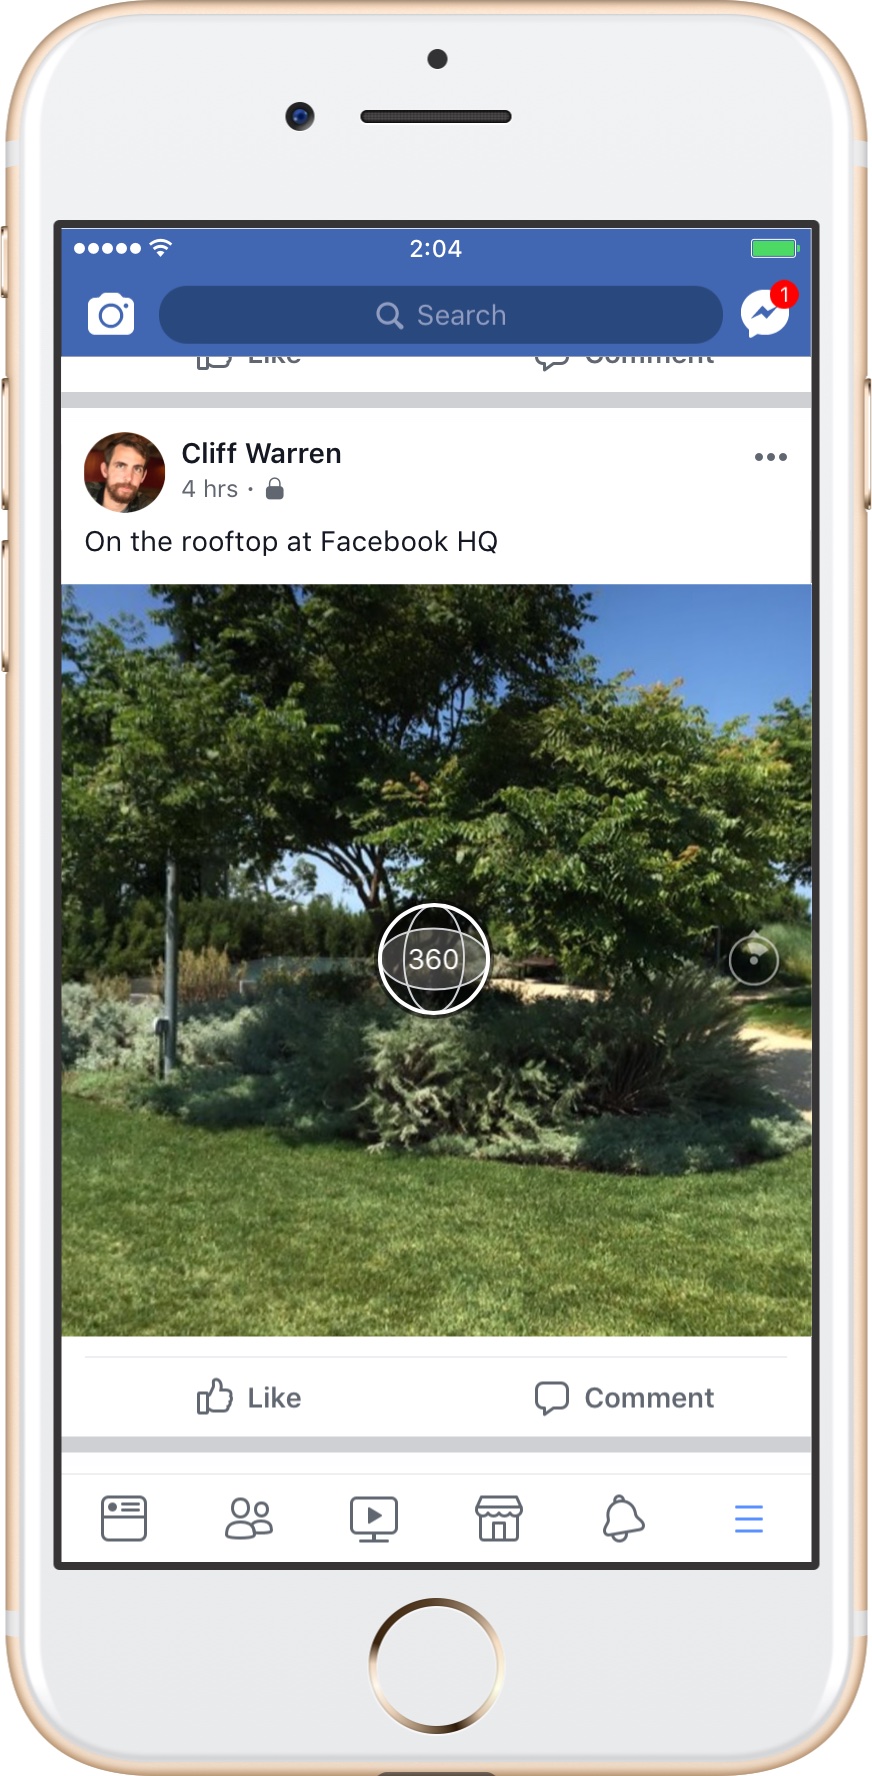 You Can Now Take 360 Degree Photos in the Facebook App